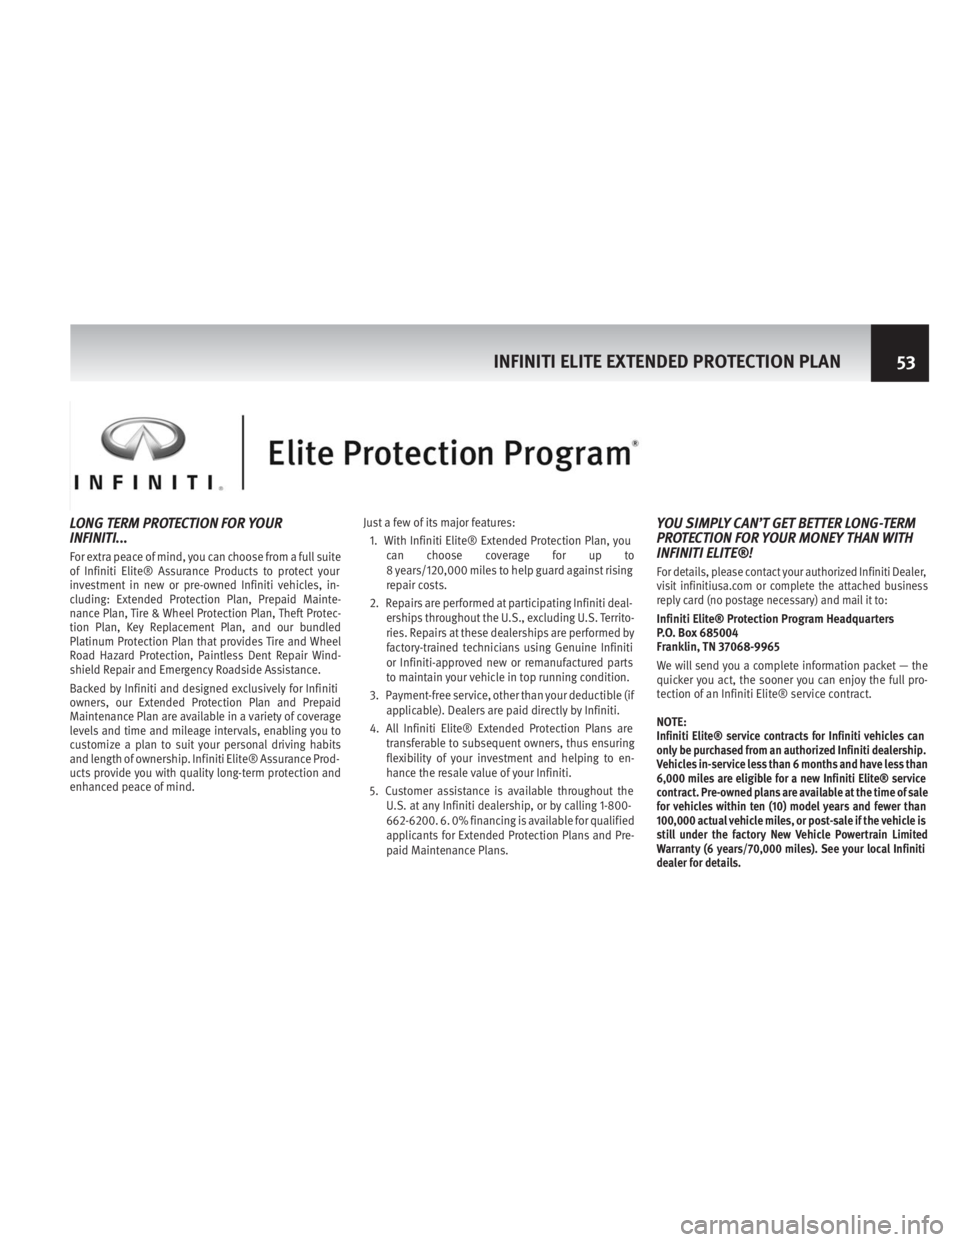 INFINITI QX70 2014  Warranty Information Booklet LONG TERM PROTECTION FOR YOUR
INFINITI...
For extra peace of mind, you can choose from a full suite
of Infiniti Elite® Assurance Products to protect your
investment in new or pre-owned Infiniti vehic